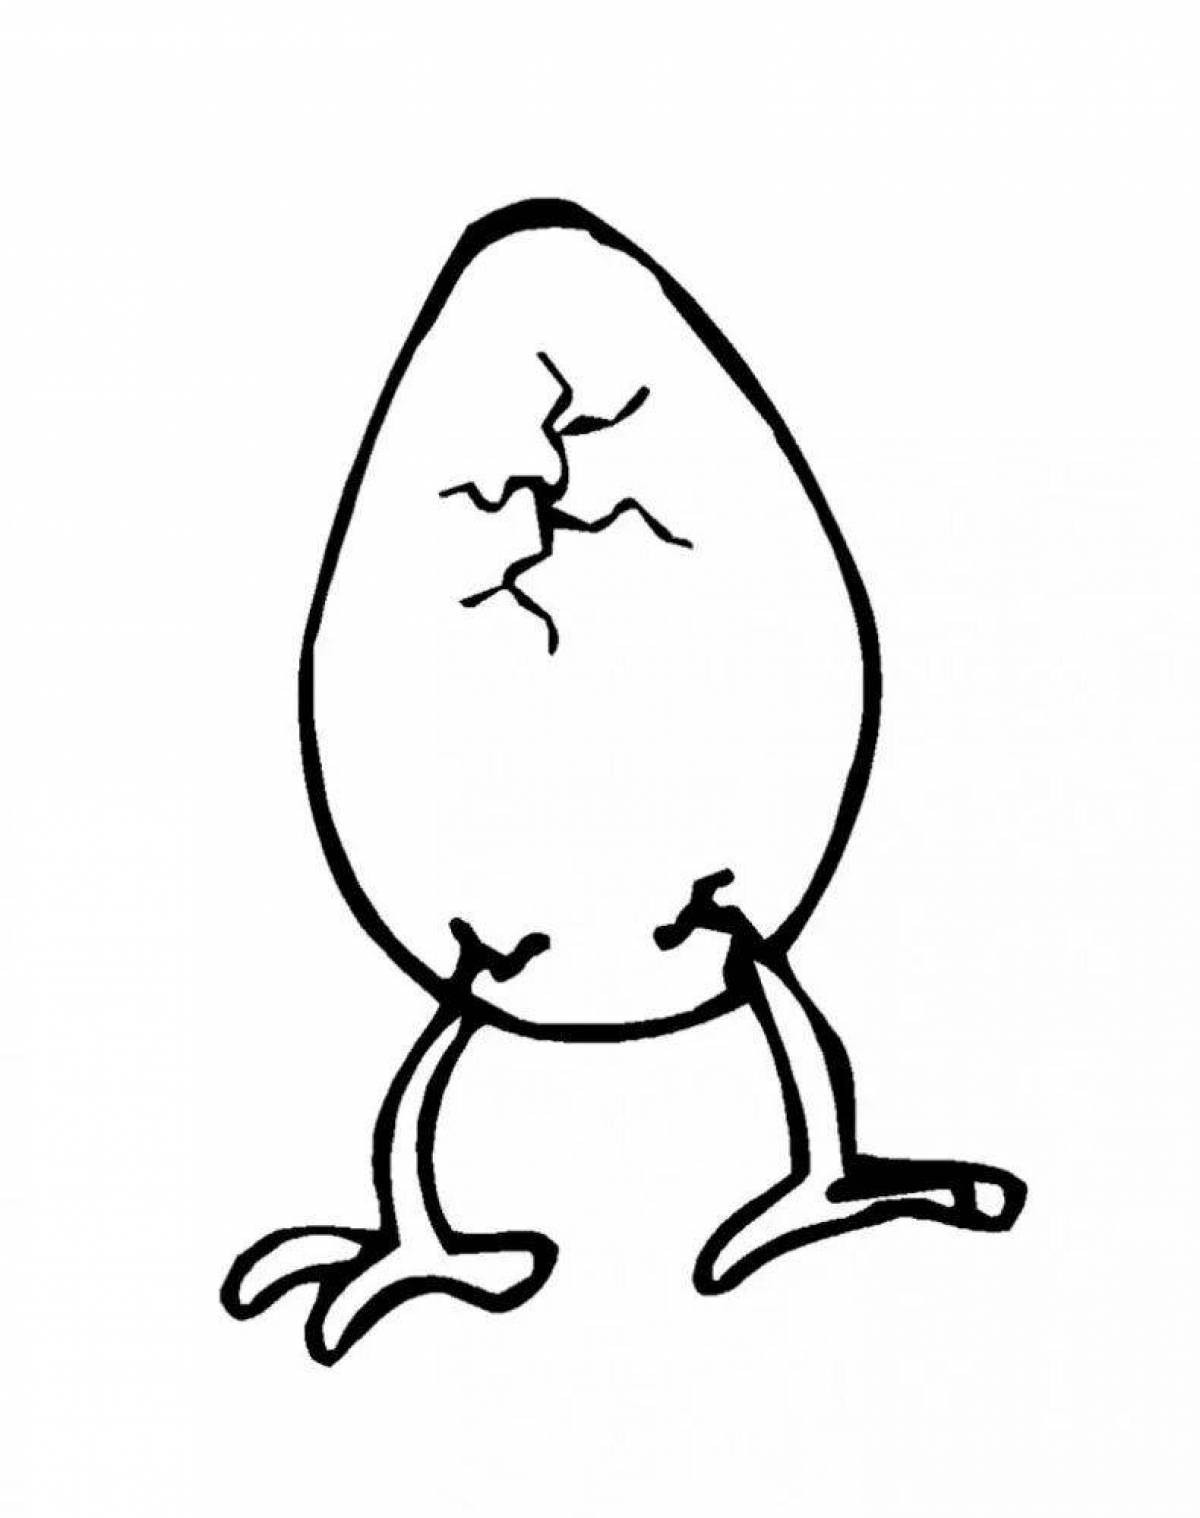 Coloring page gorgeous hen in egg